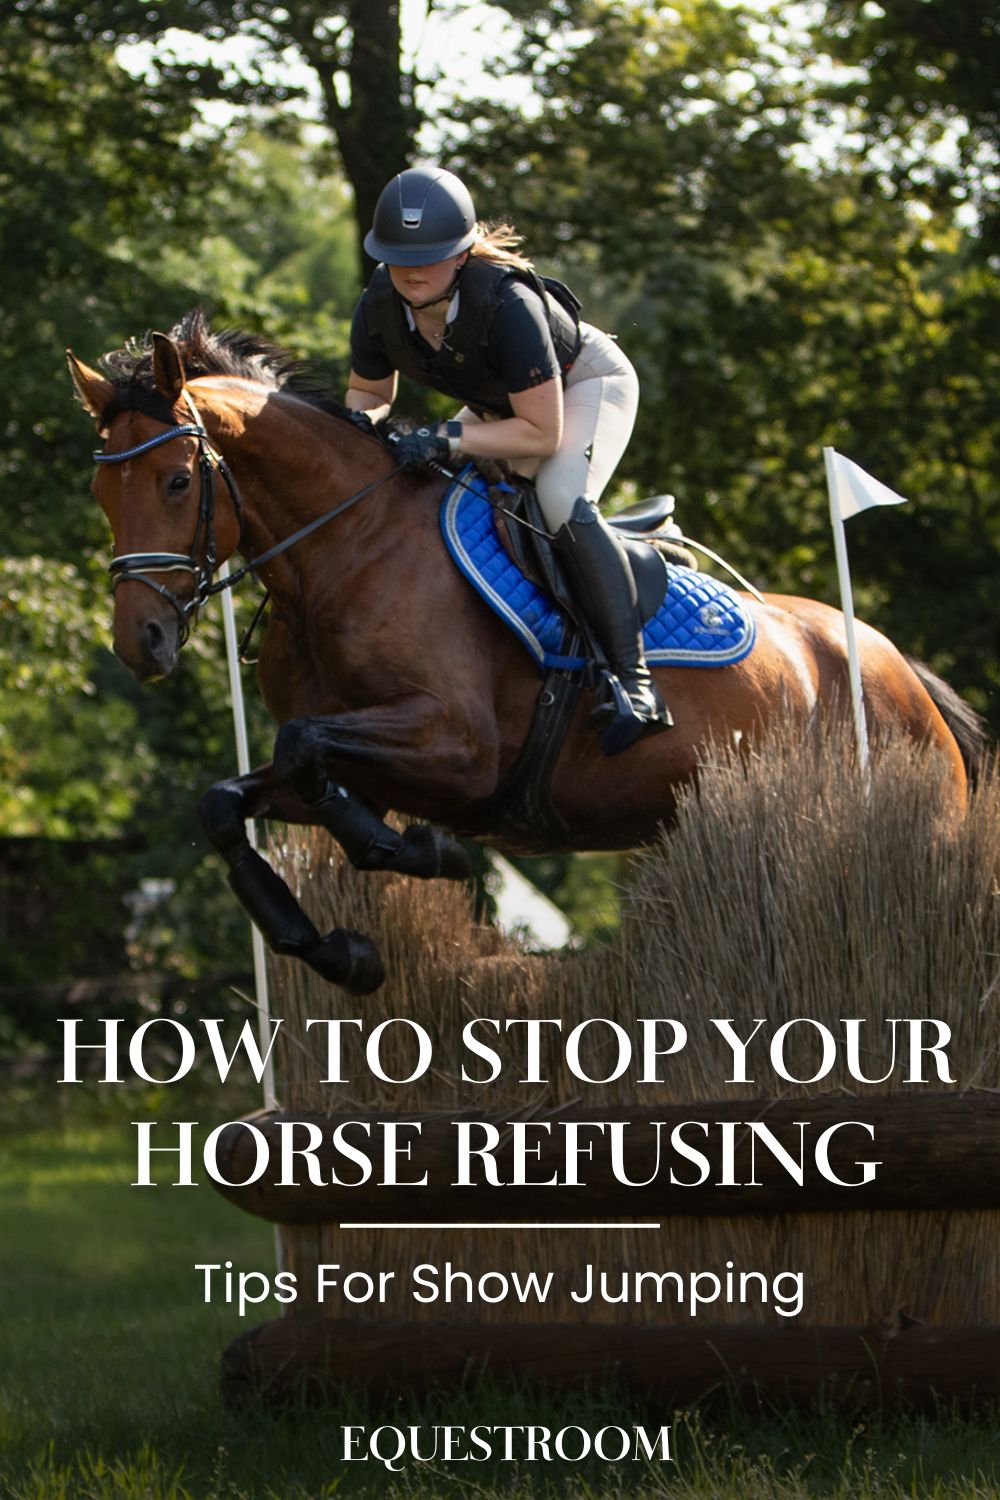 HOW TO STOP YOUR HORSE FROM REFUSING